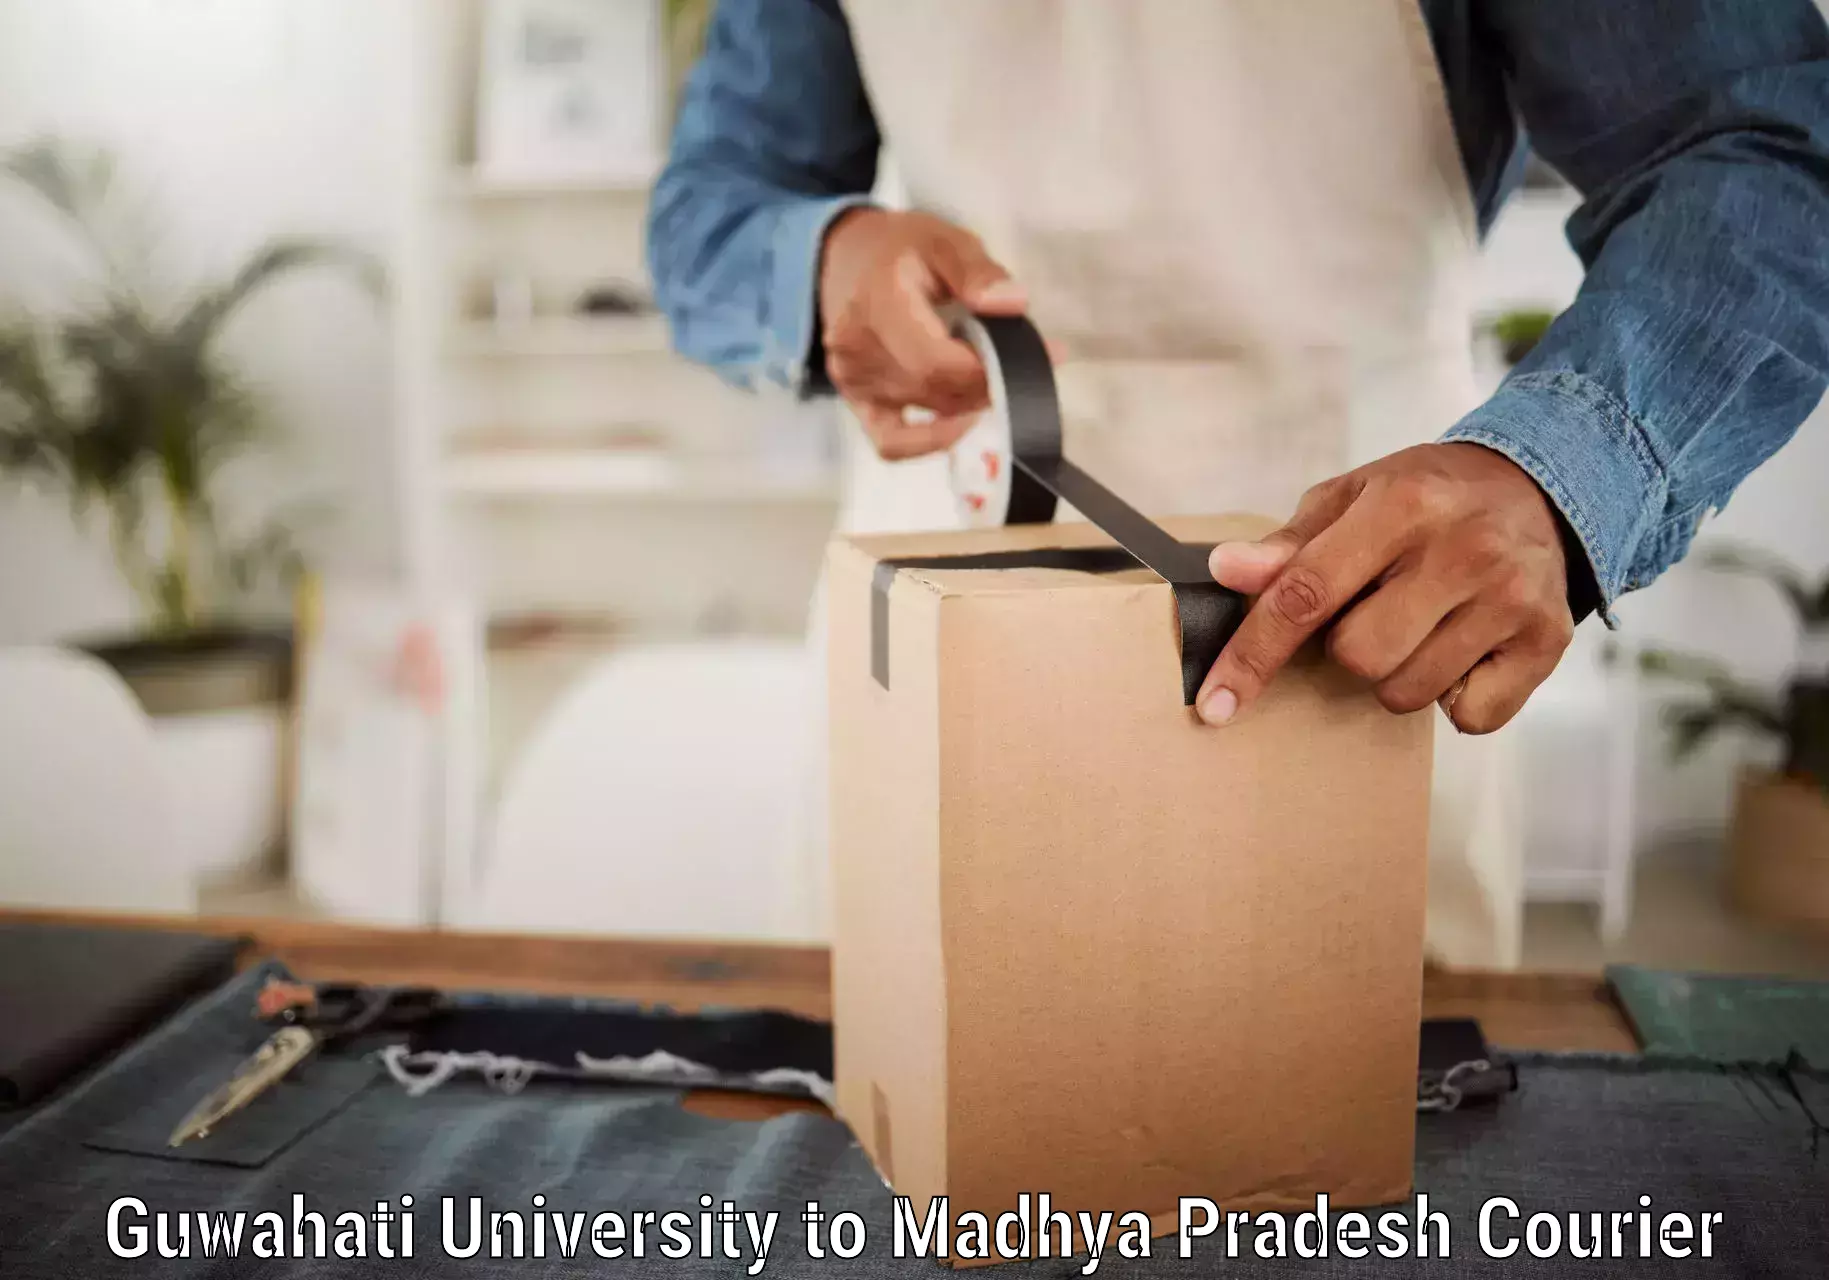 Versatile courier offerings in Guwahati University to Indore